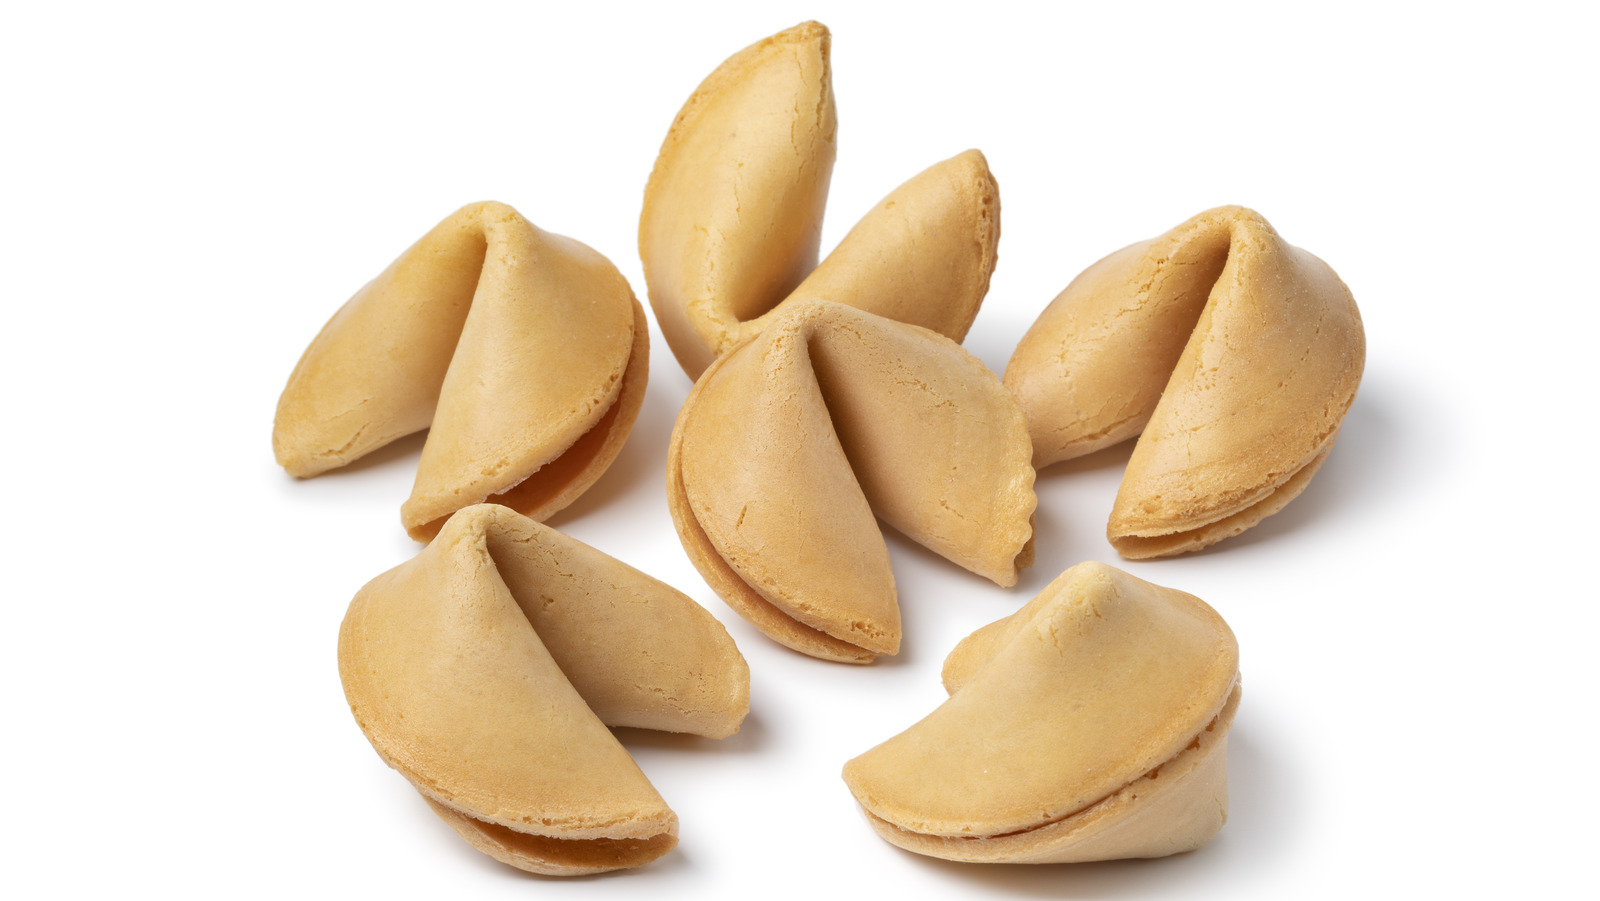 Most Of The World's Fortune Cookies Come From One NYC Company